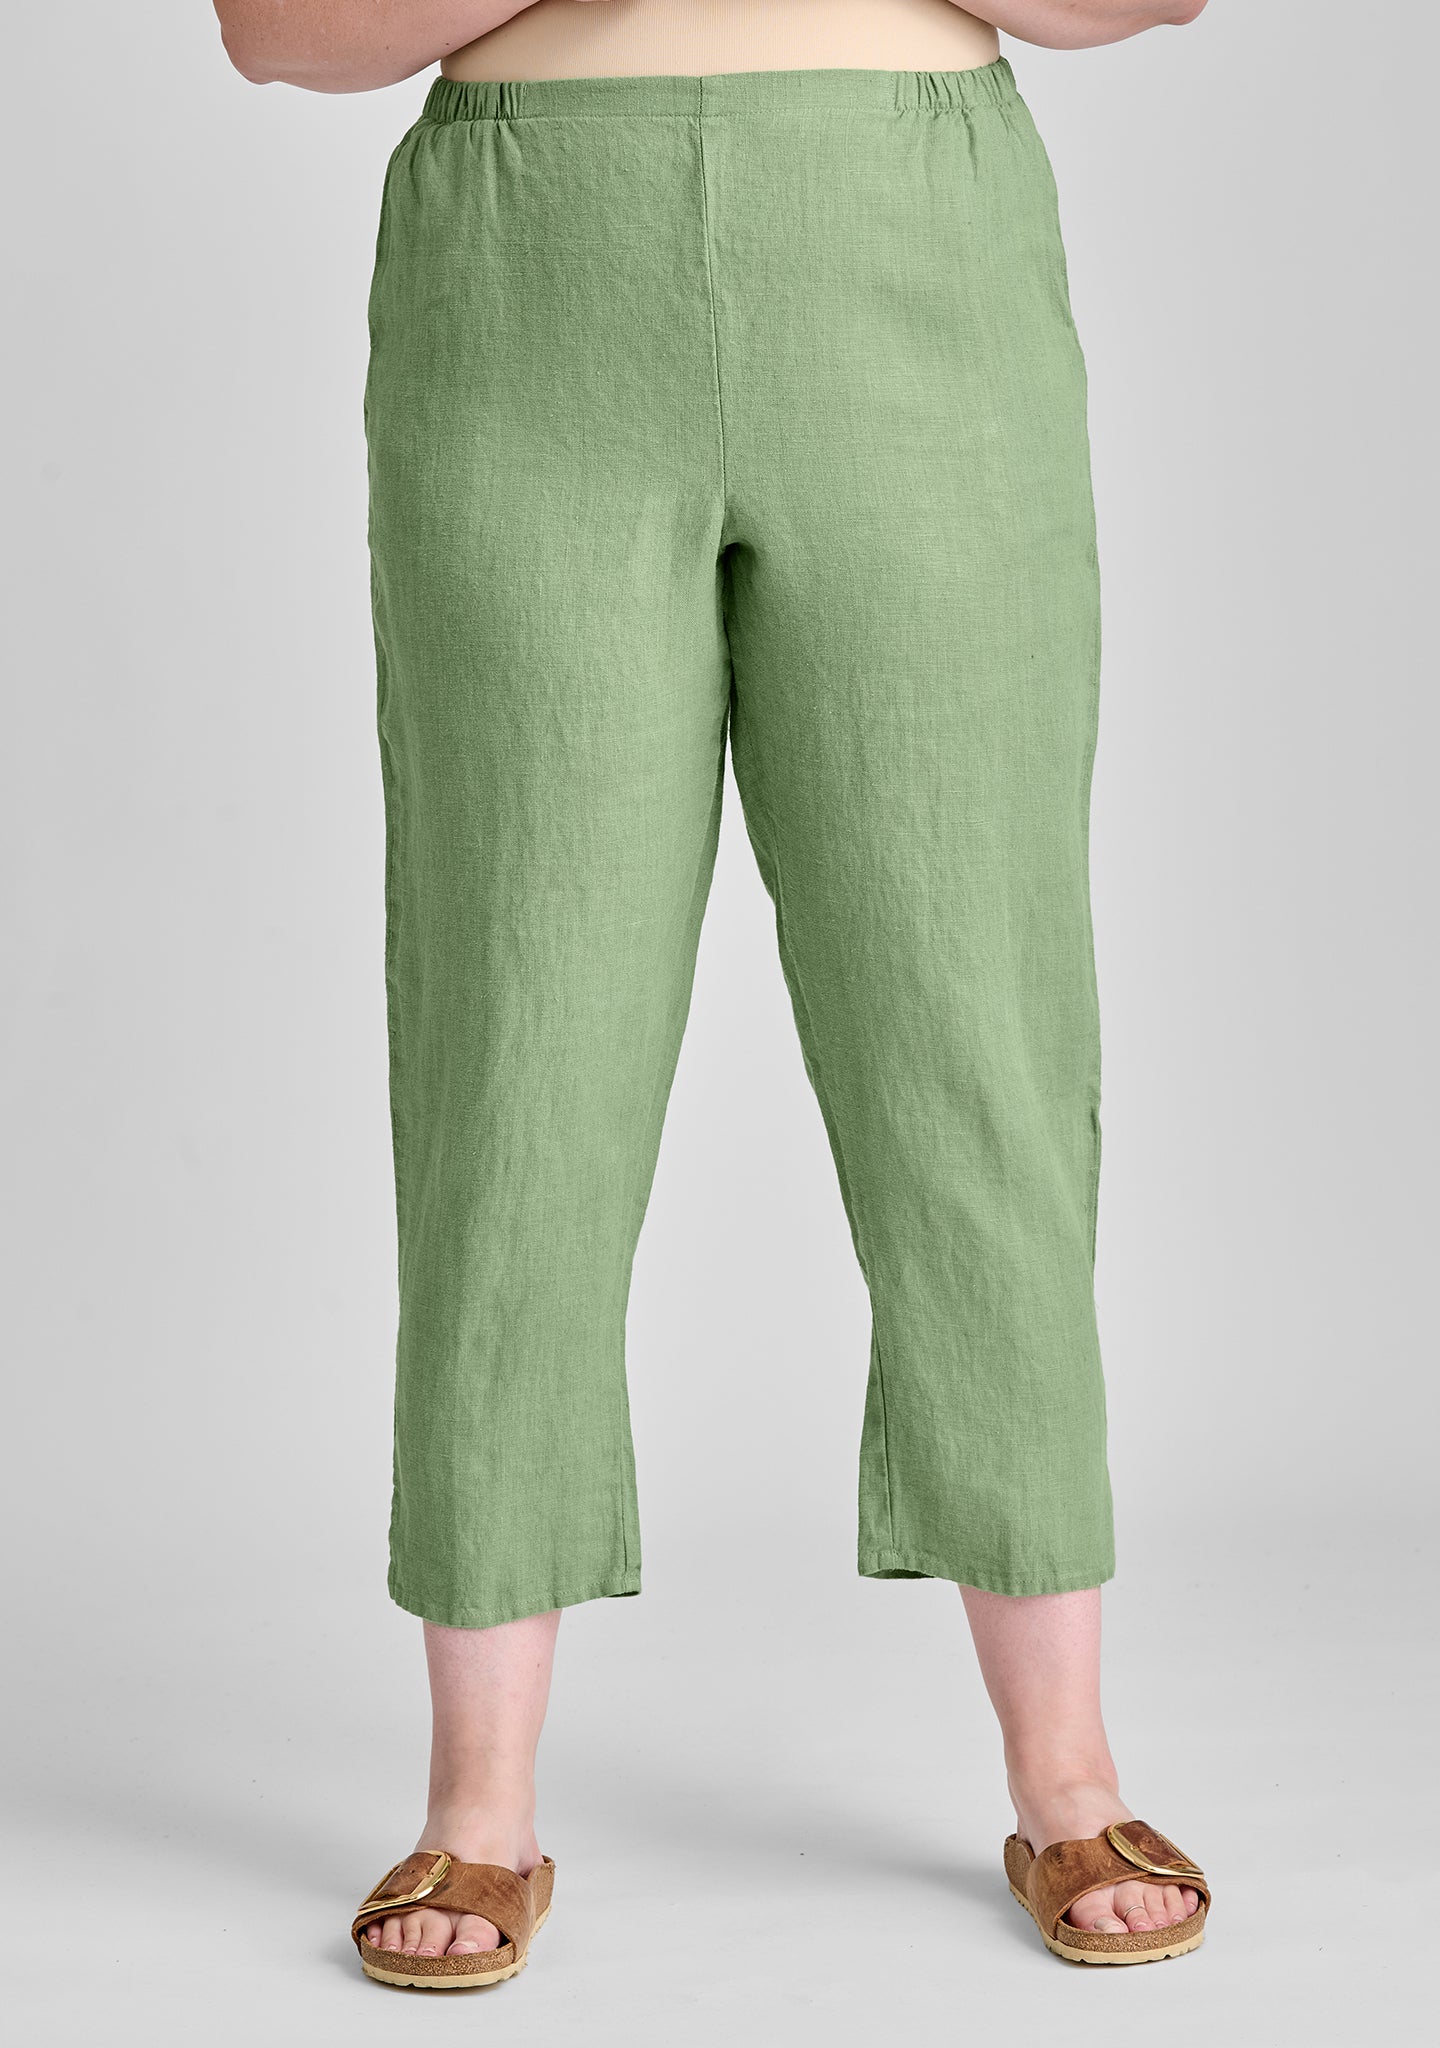 pocketed ankle pant linen pants green